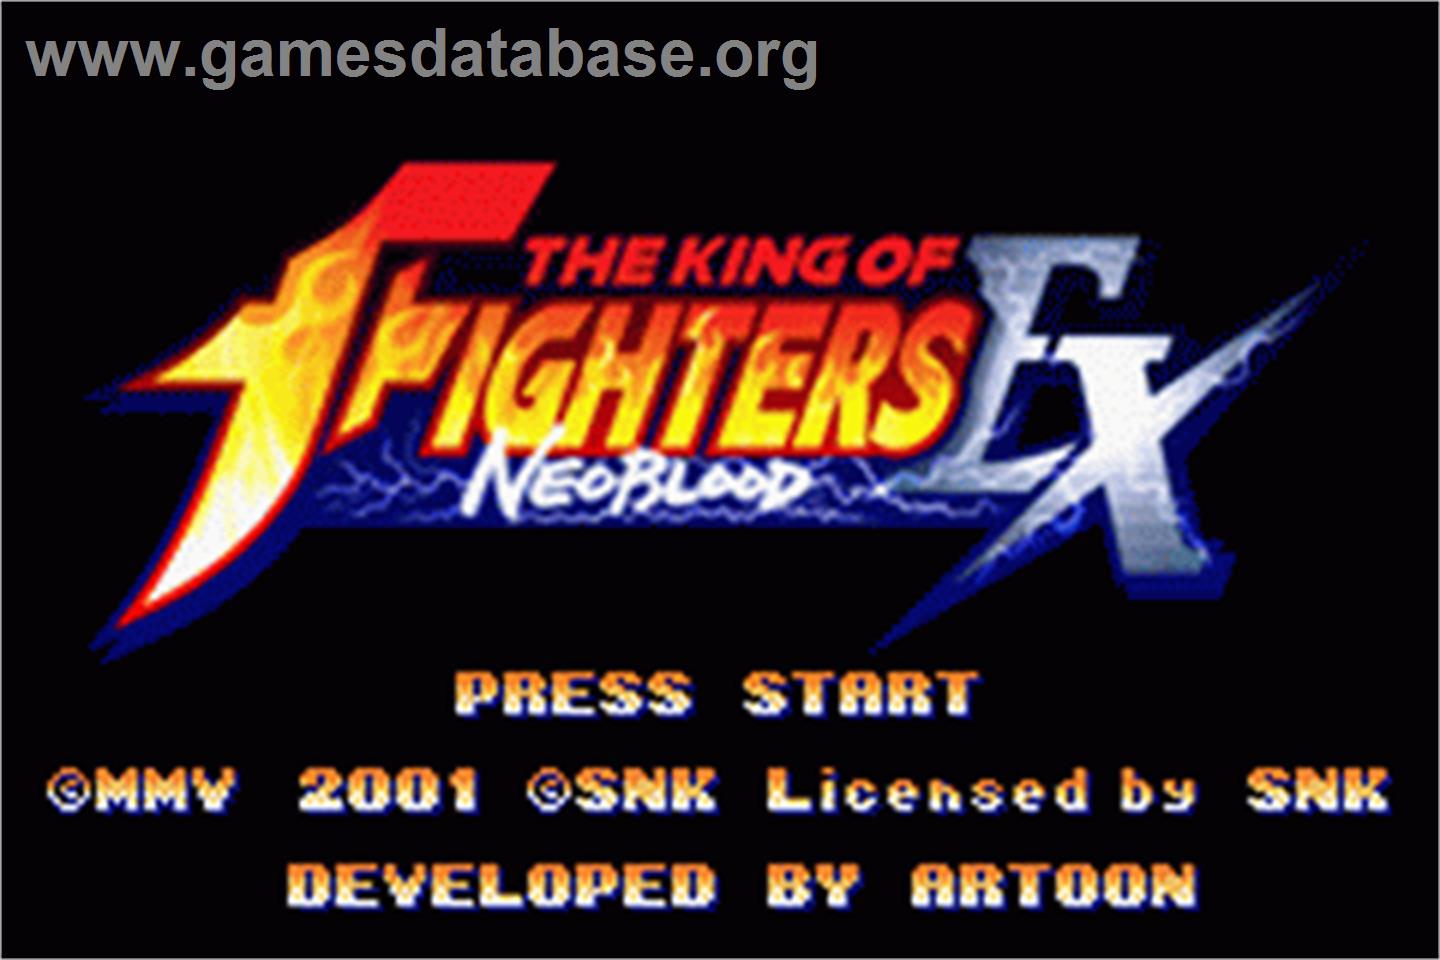 King of Fighters EX: Neo Blood - Nintendo Game Boy Advance - Artwork - Title Screen